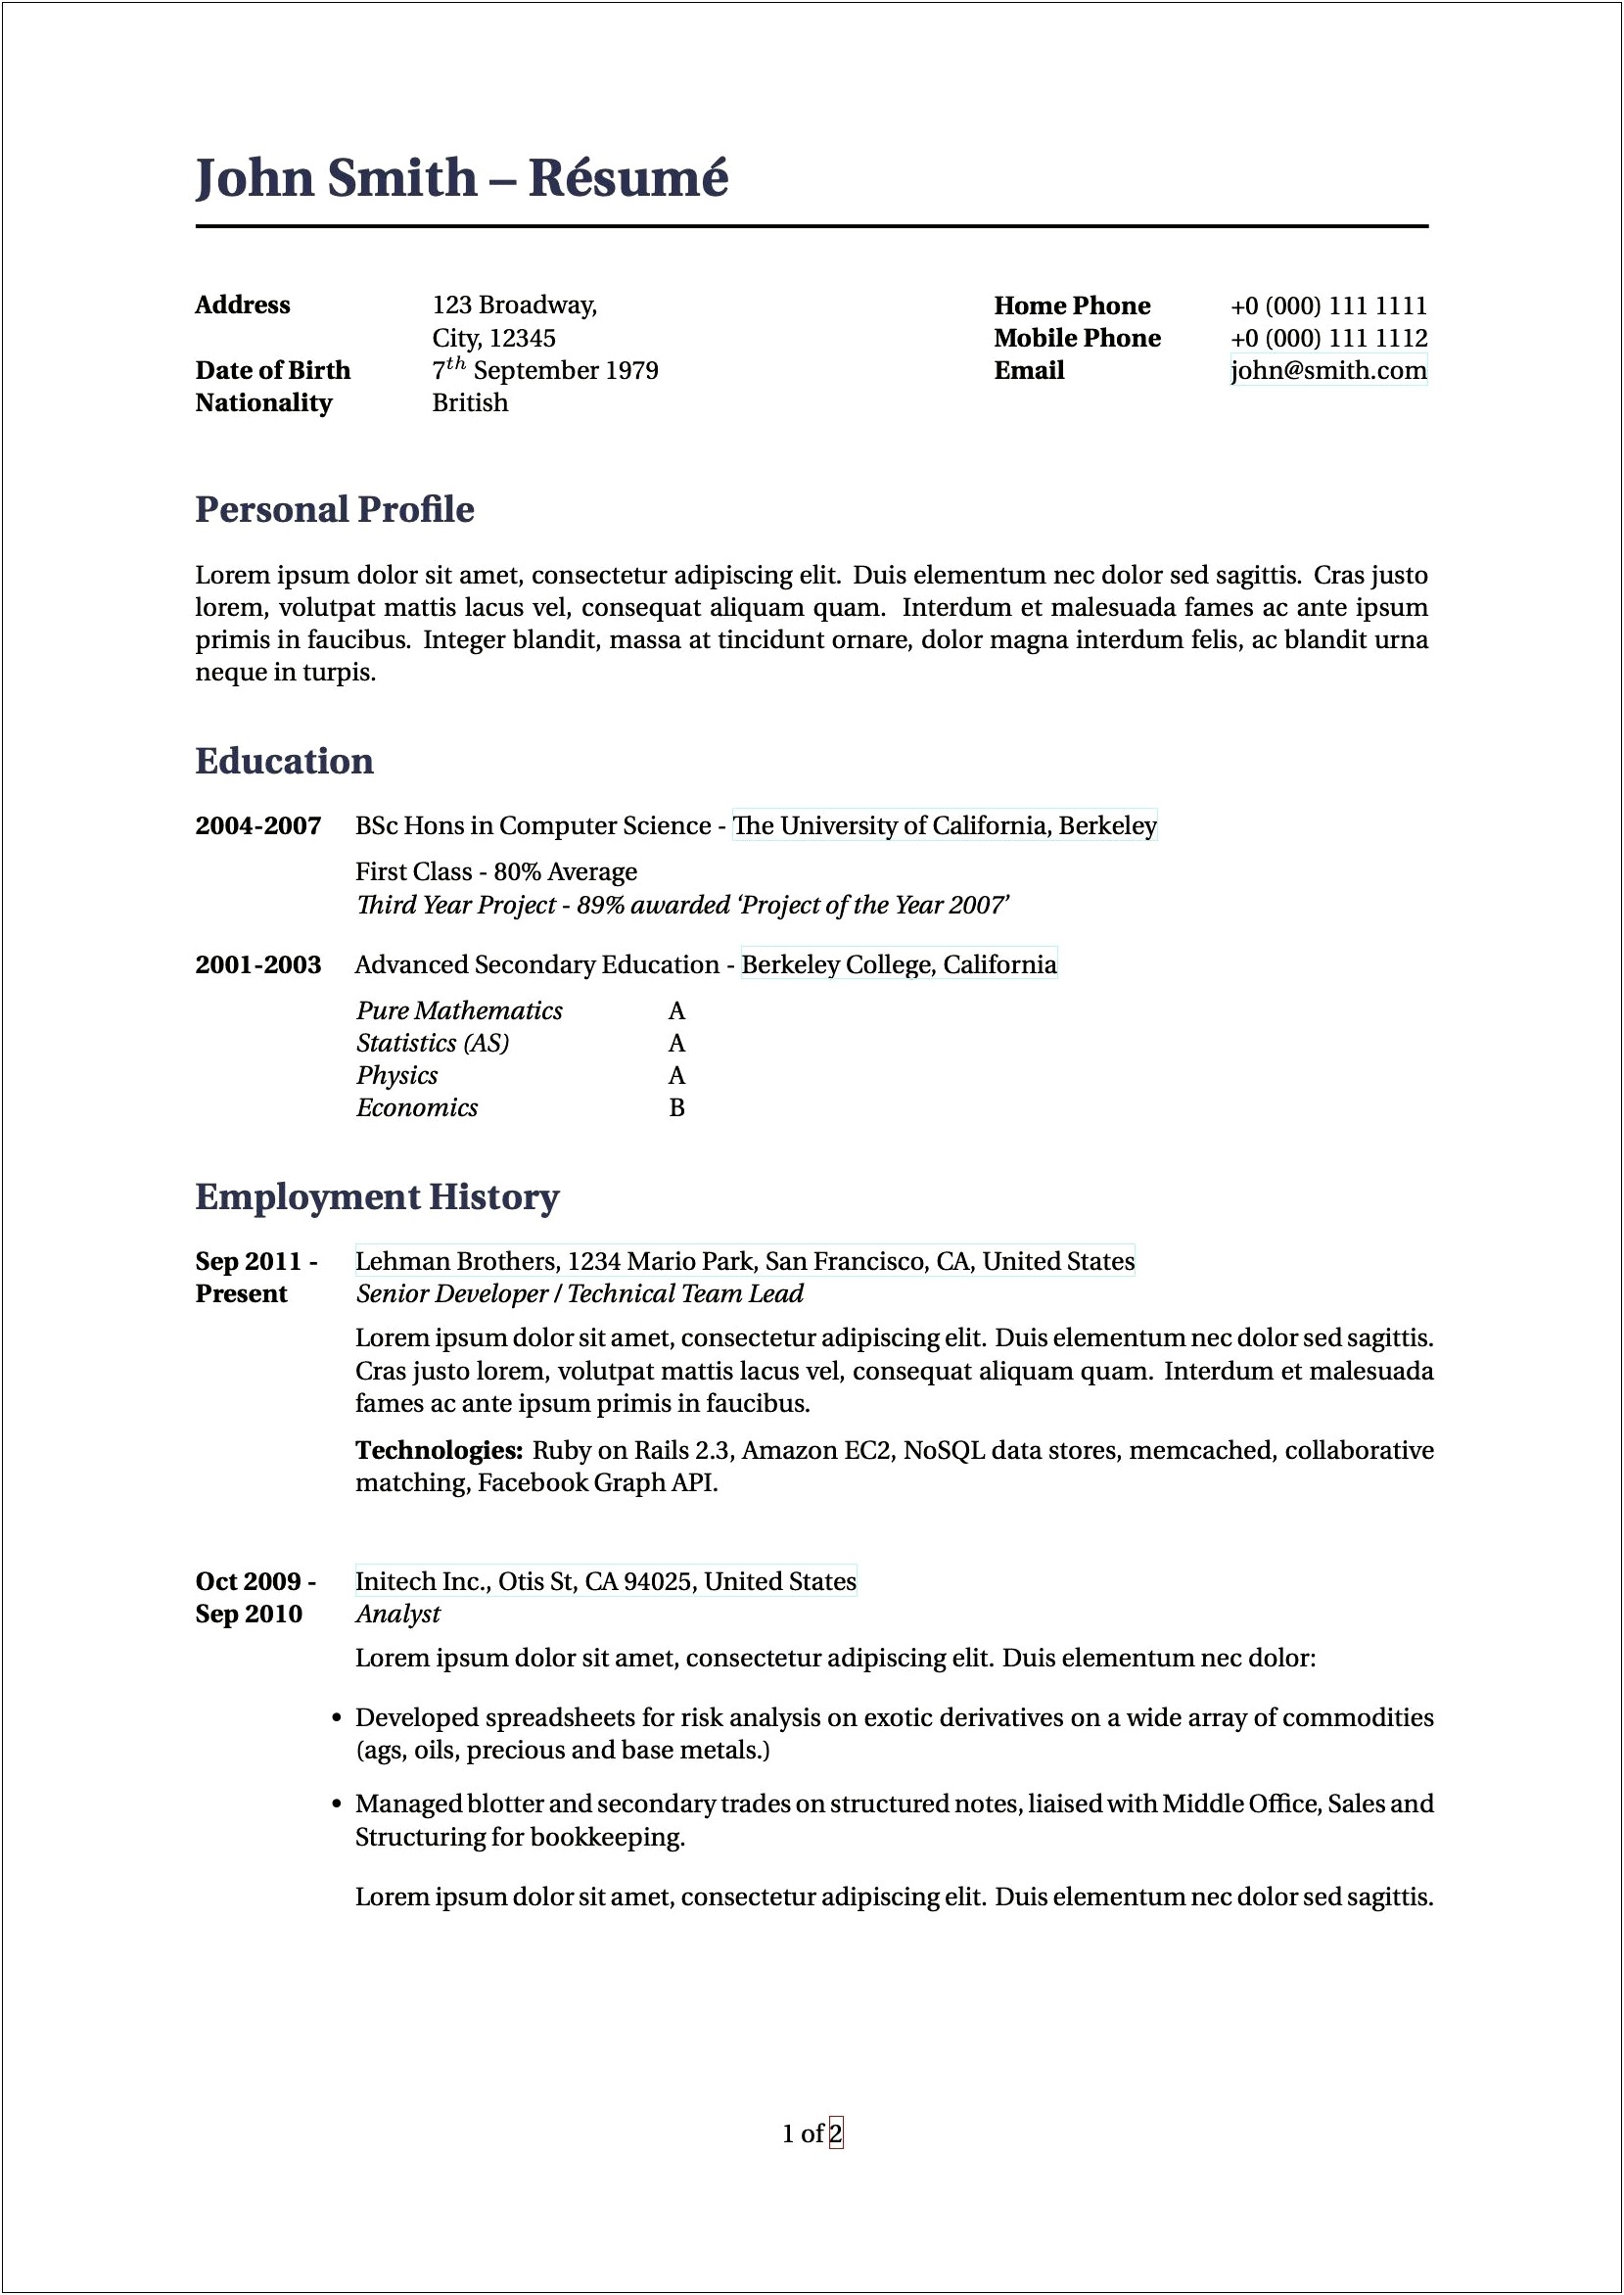 Examples Of Publications In A Resume